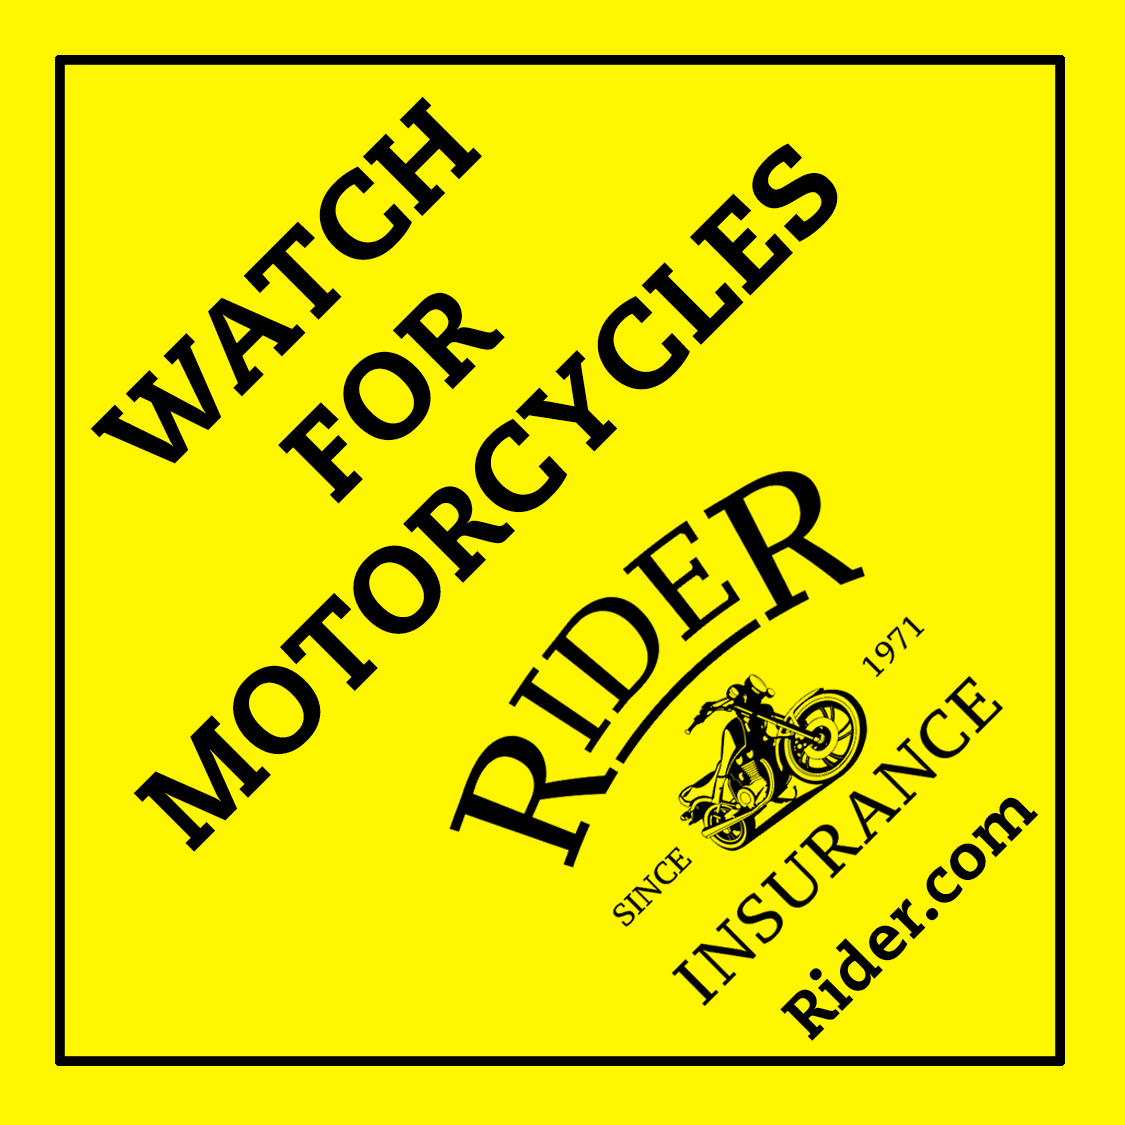 Watch for motorcycles decal.